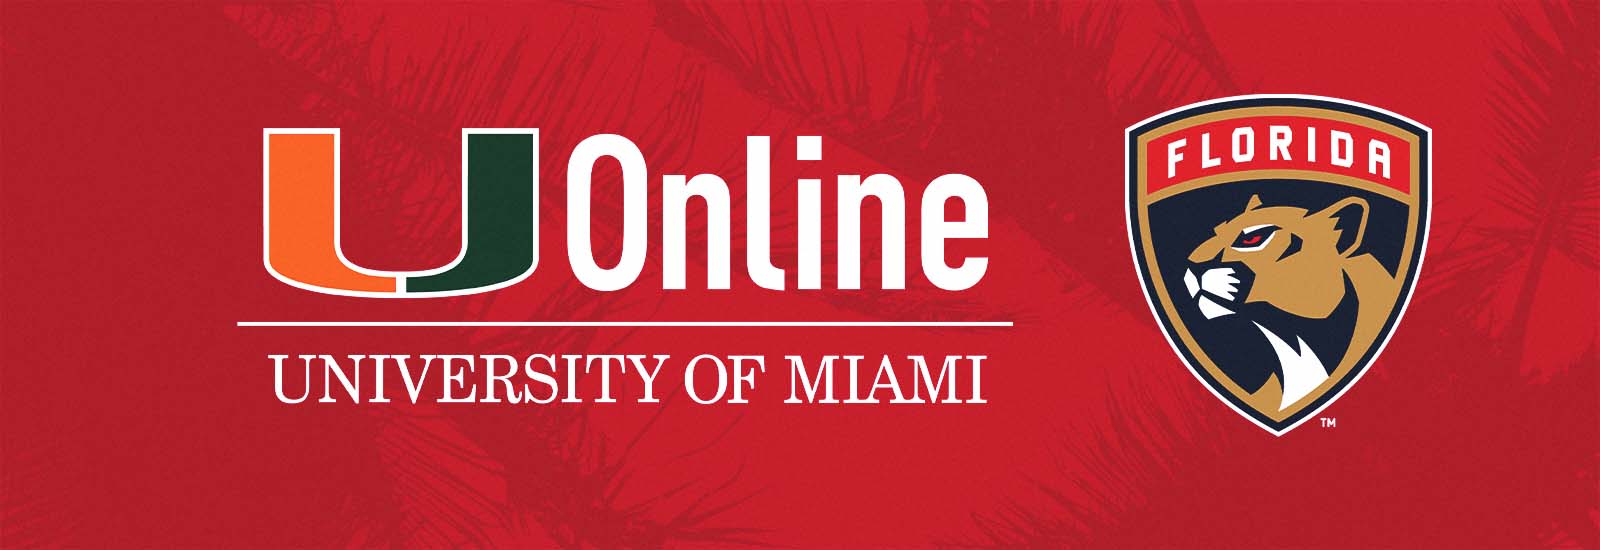 florida panthers select uonline as official educational partners